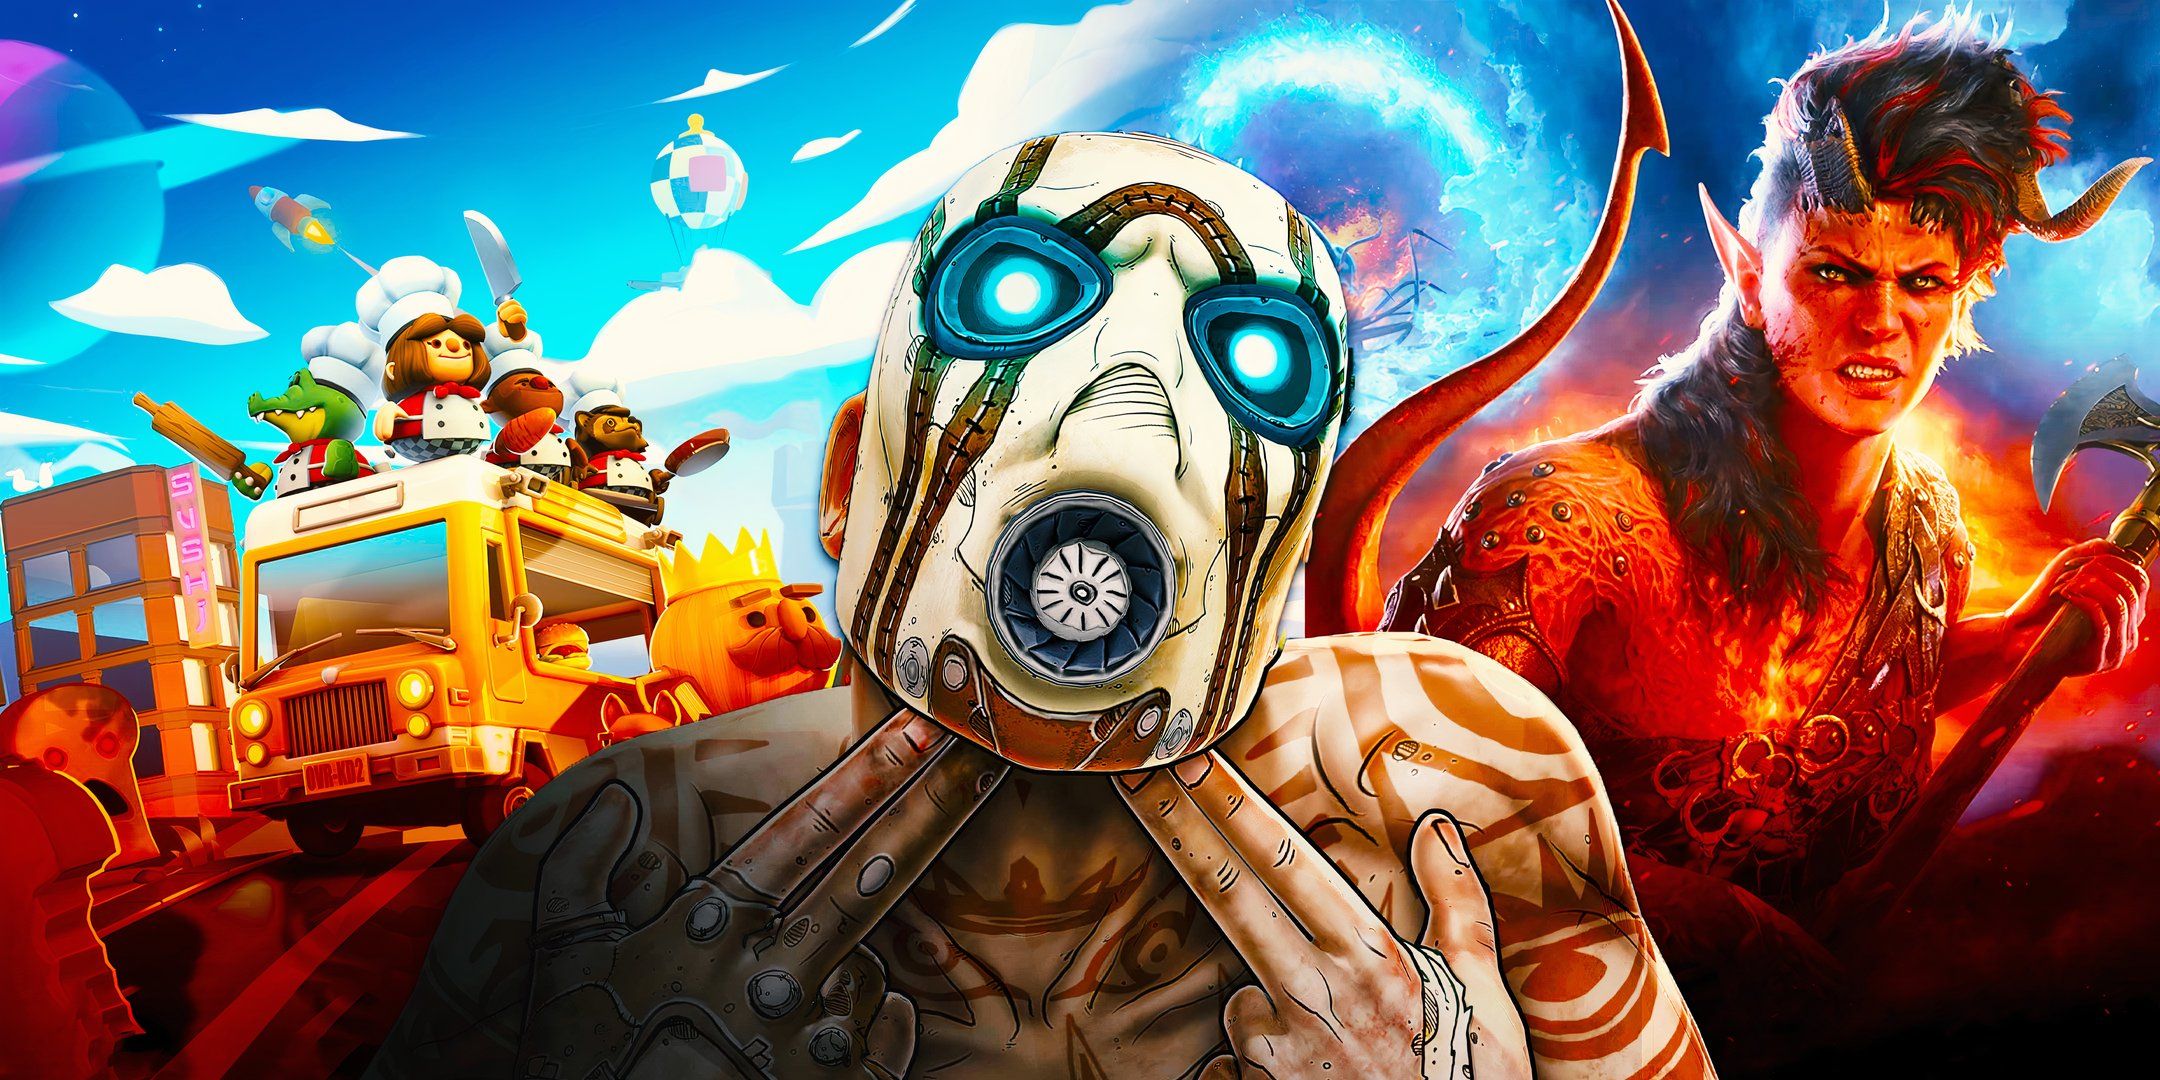 Borderlands 2, overcooked 2 school bus and Karlach from Baldur's Gate 3.